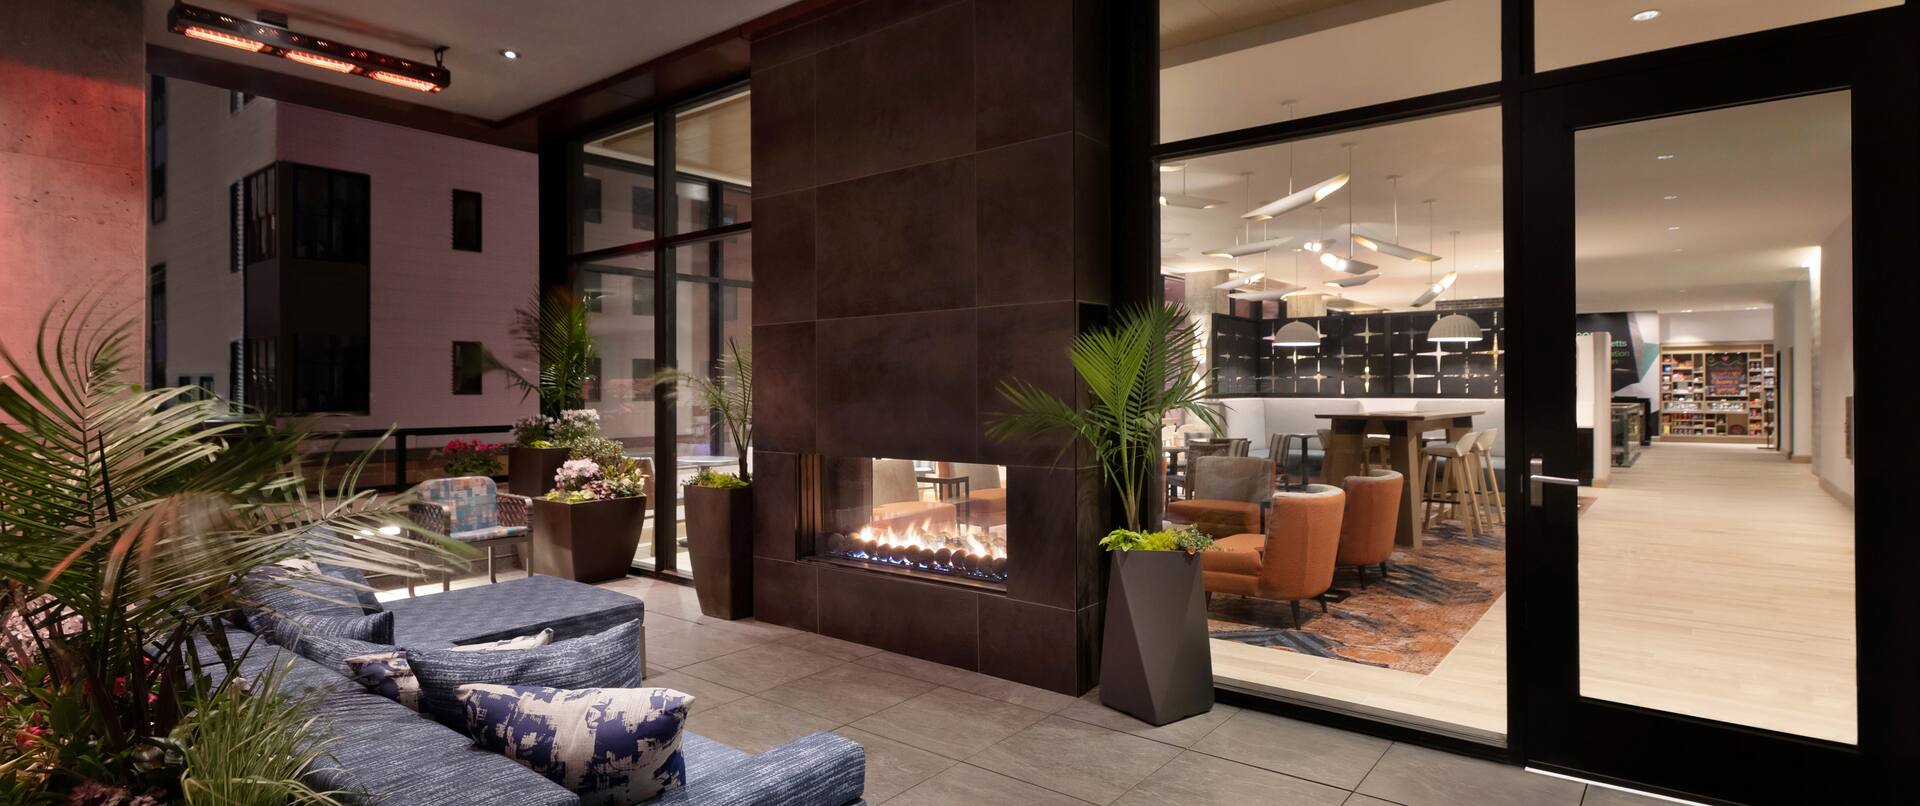 Outdoor Seating Area With Fireplace